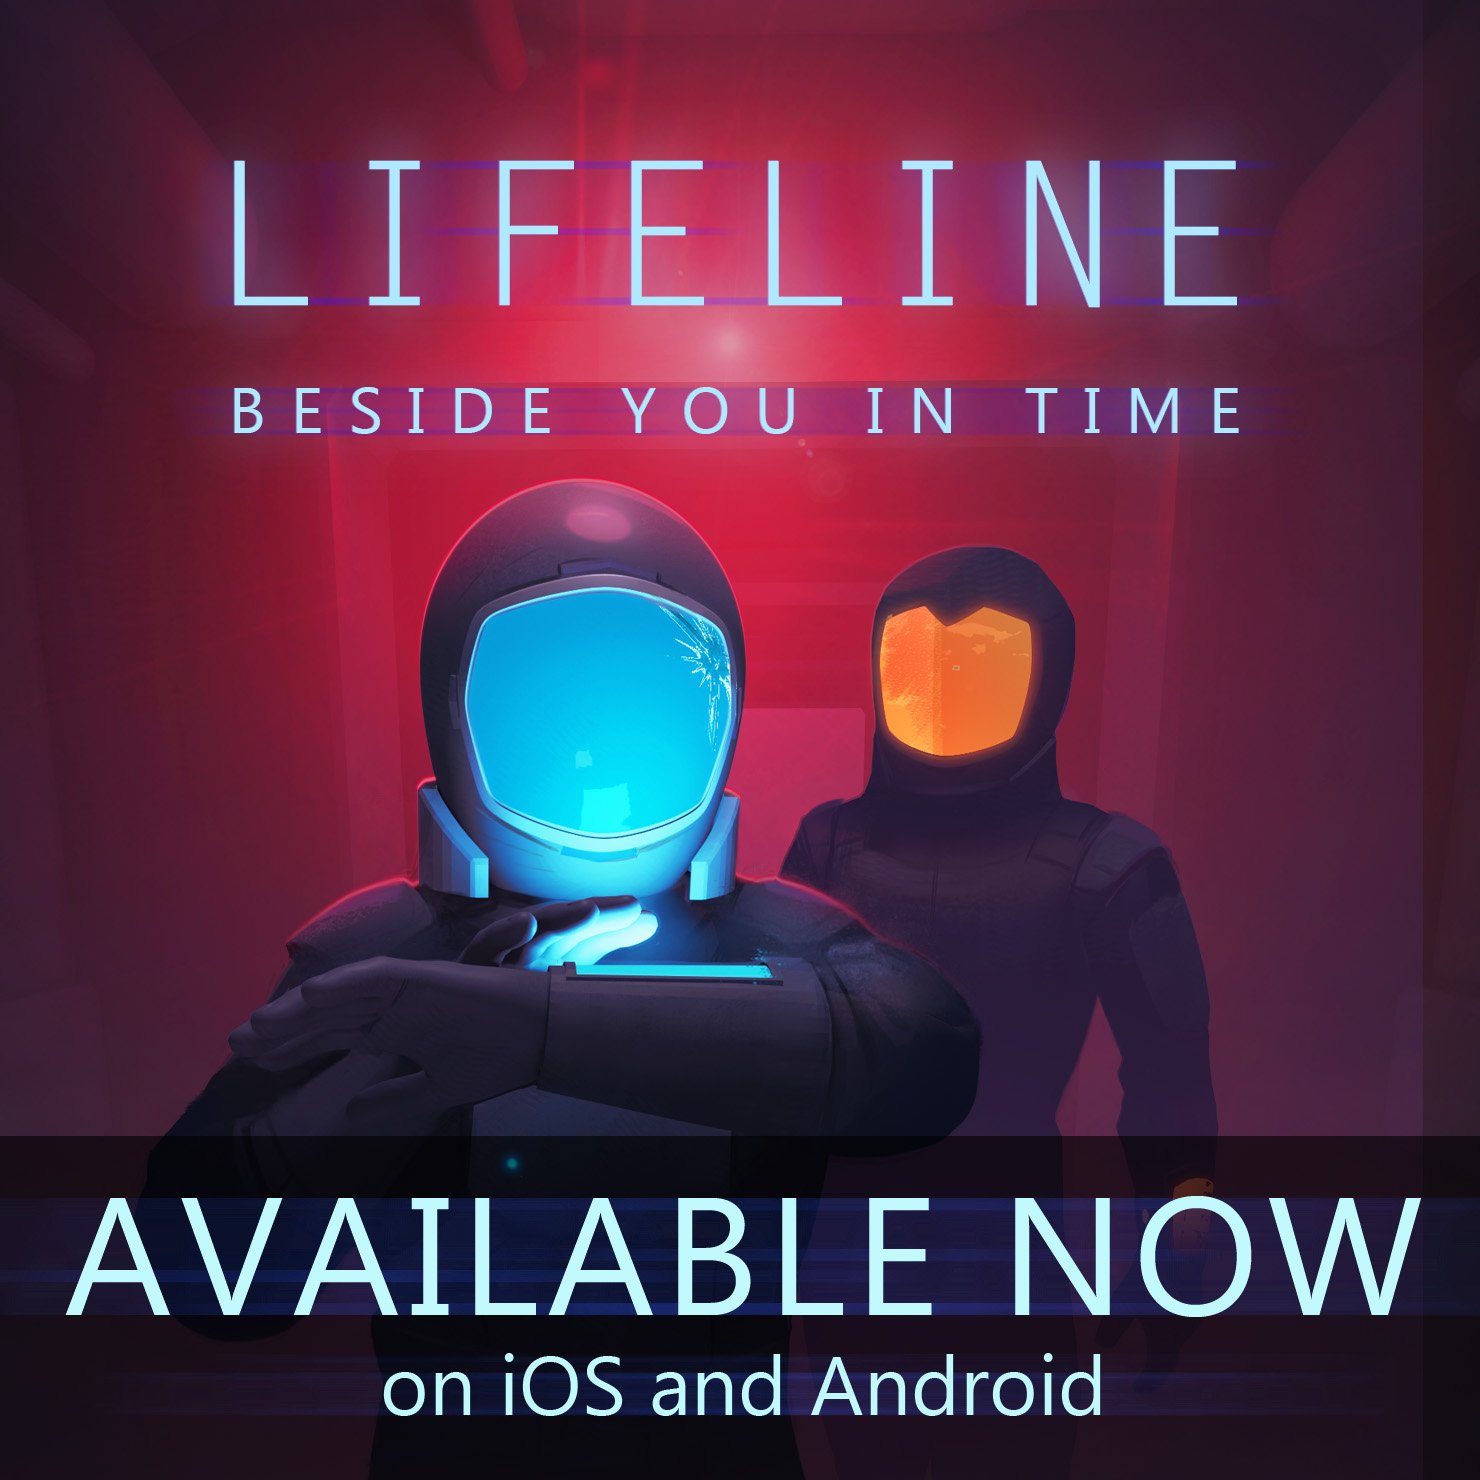 lifeline beside you in time download out now